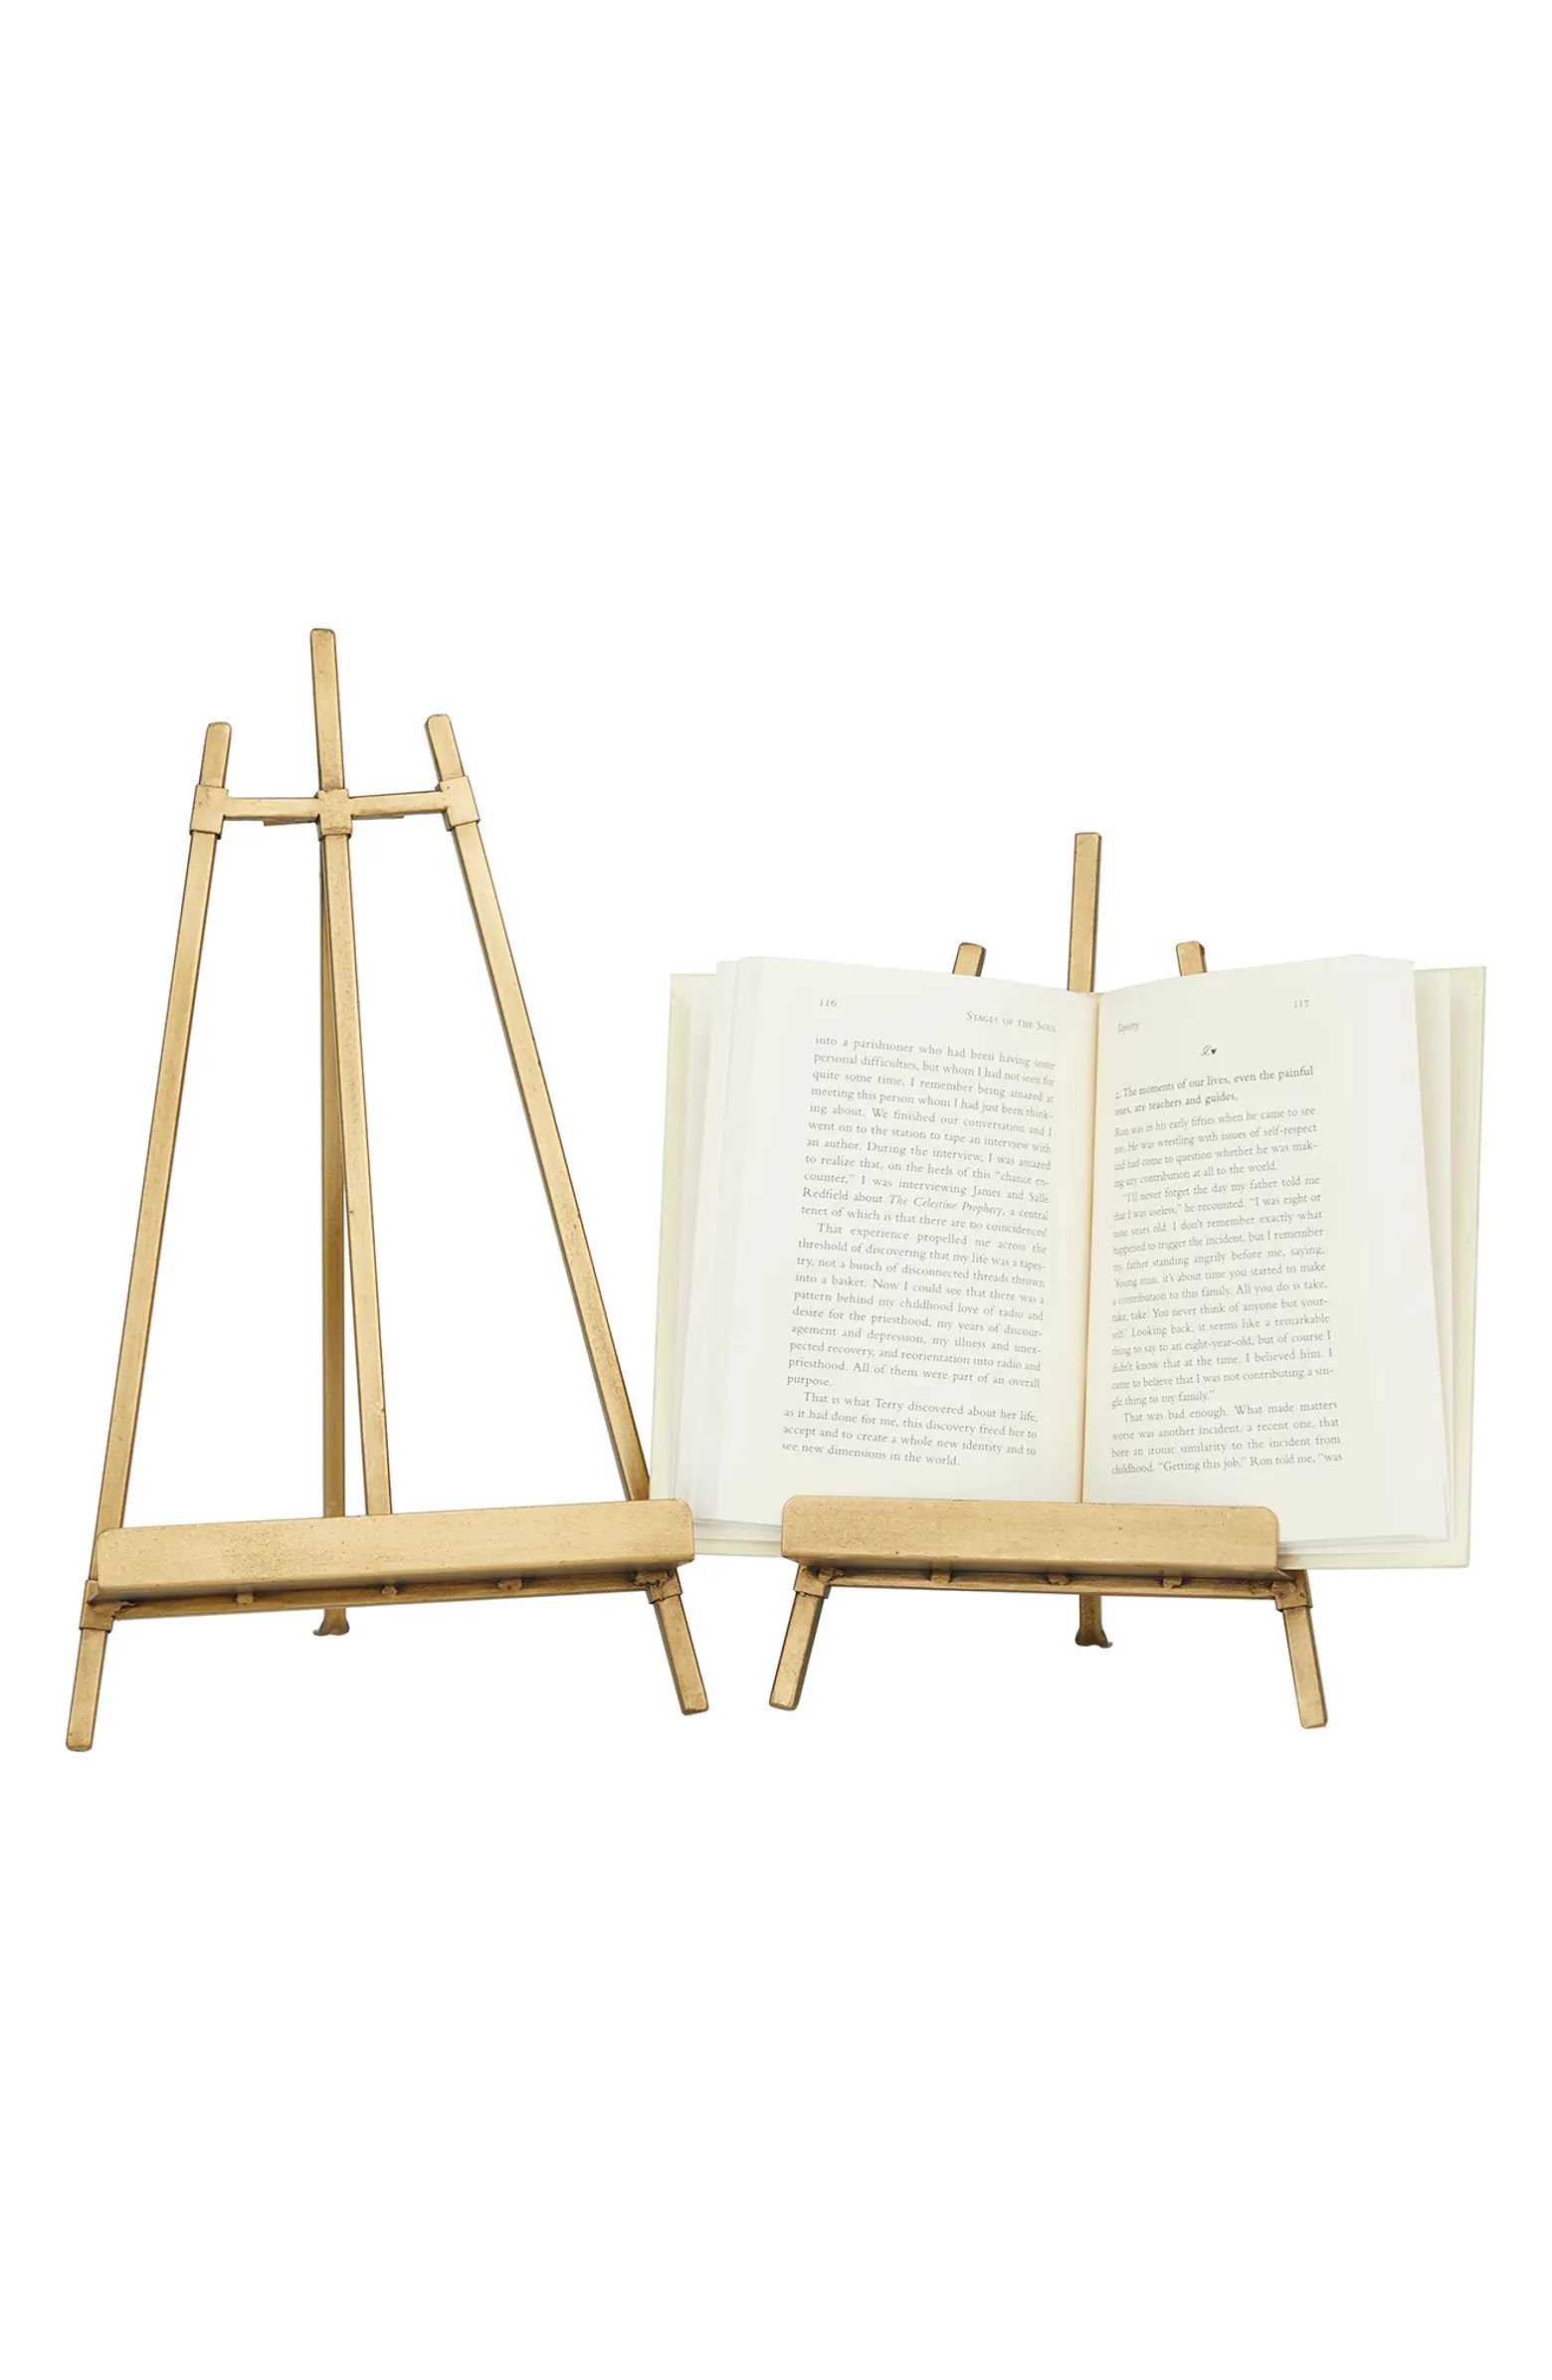 Goldtone Metal Traditional Easel with Foldable Stand - Set of 2 | Nordstrom Rack